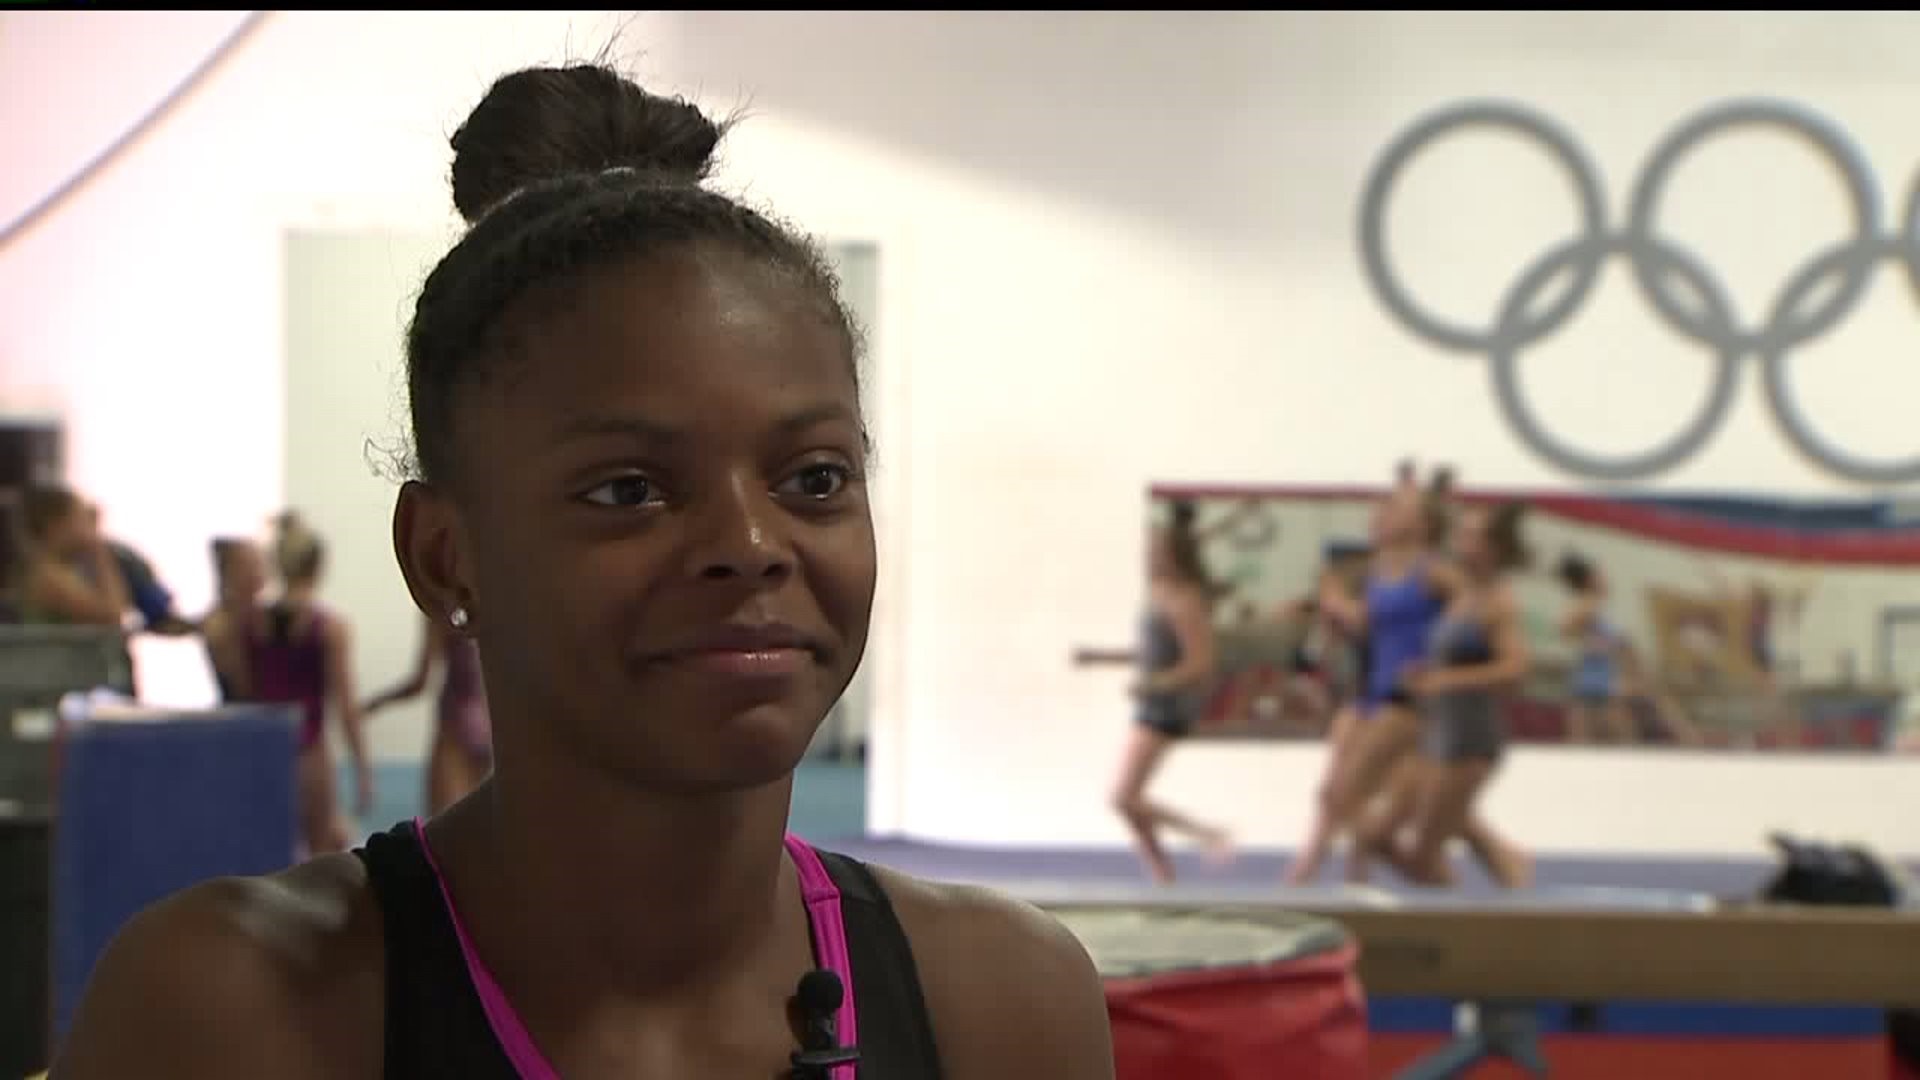 York County gymnast going for the gold